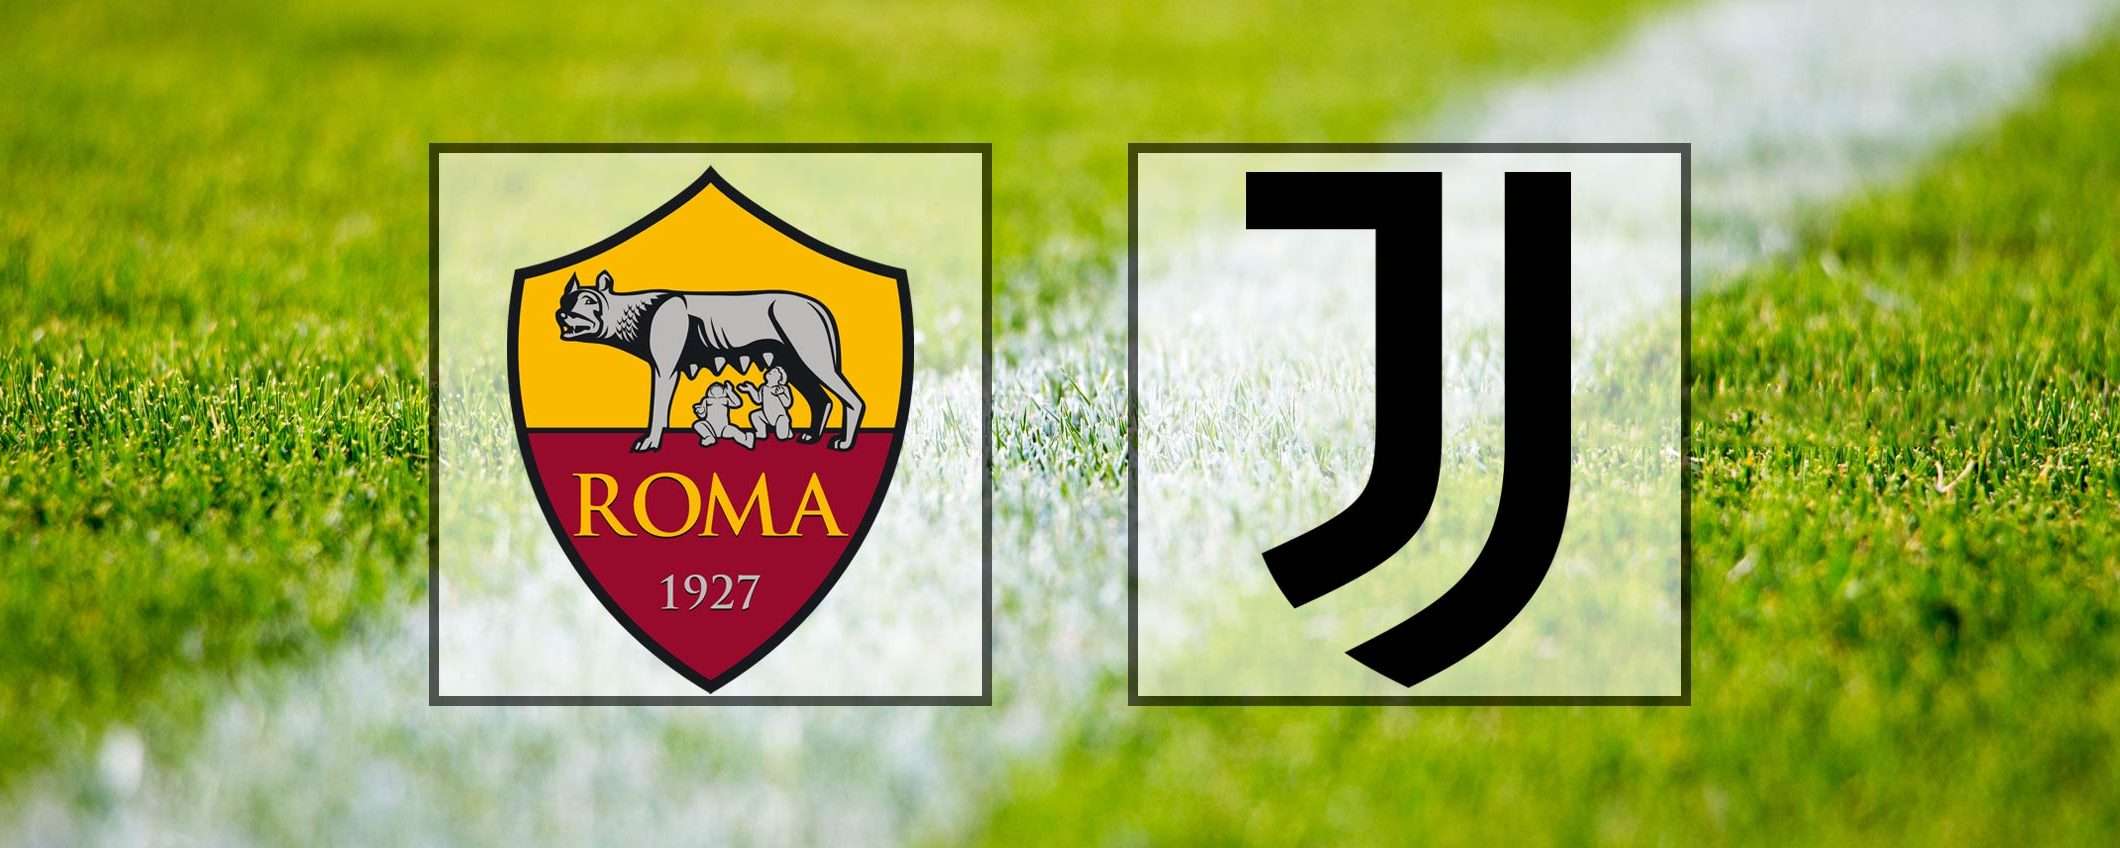 Come vedere Roma-Juventus in streaming